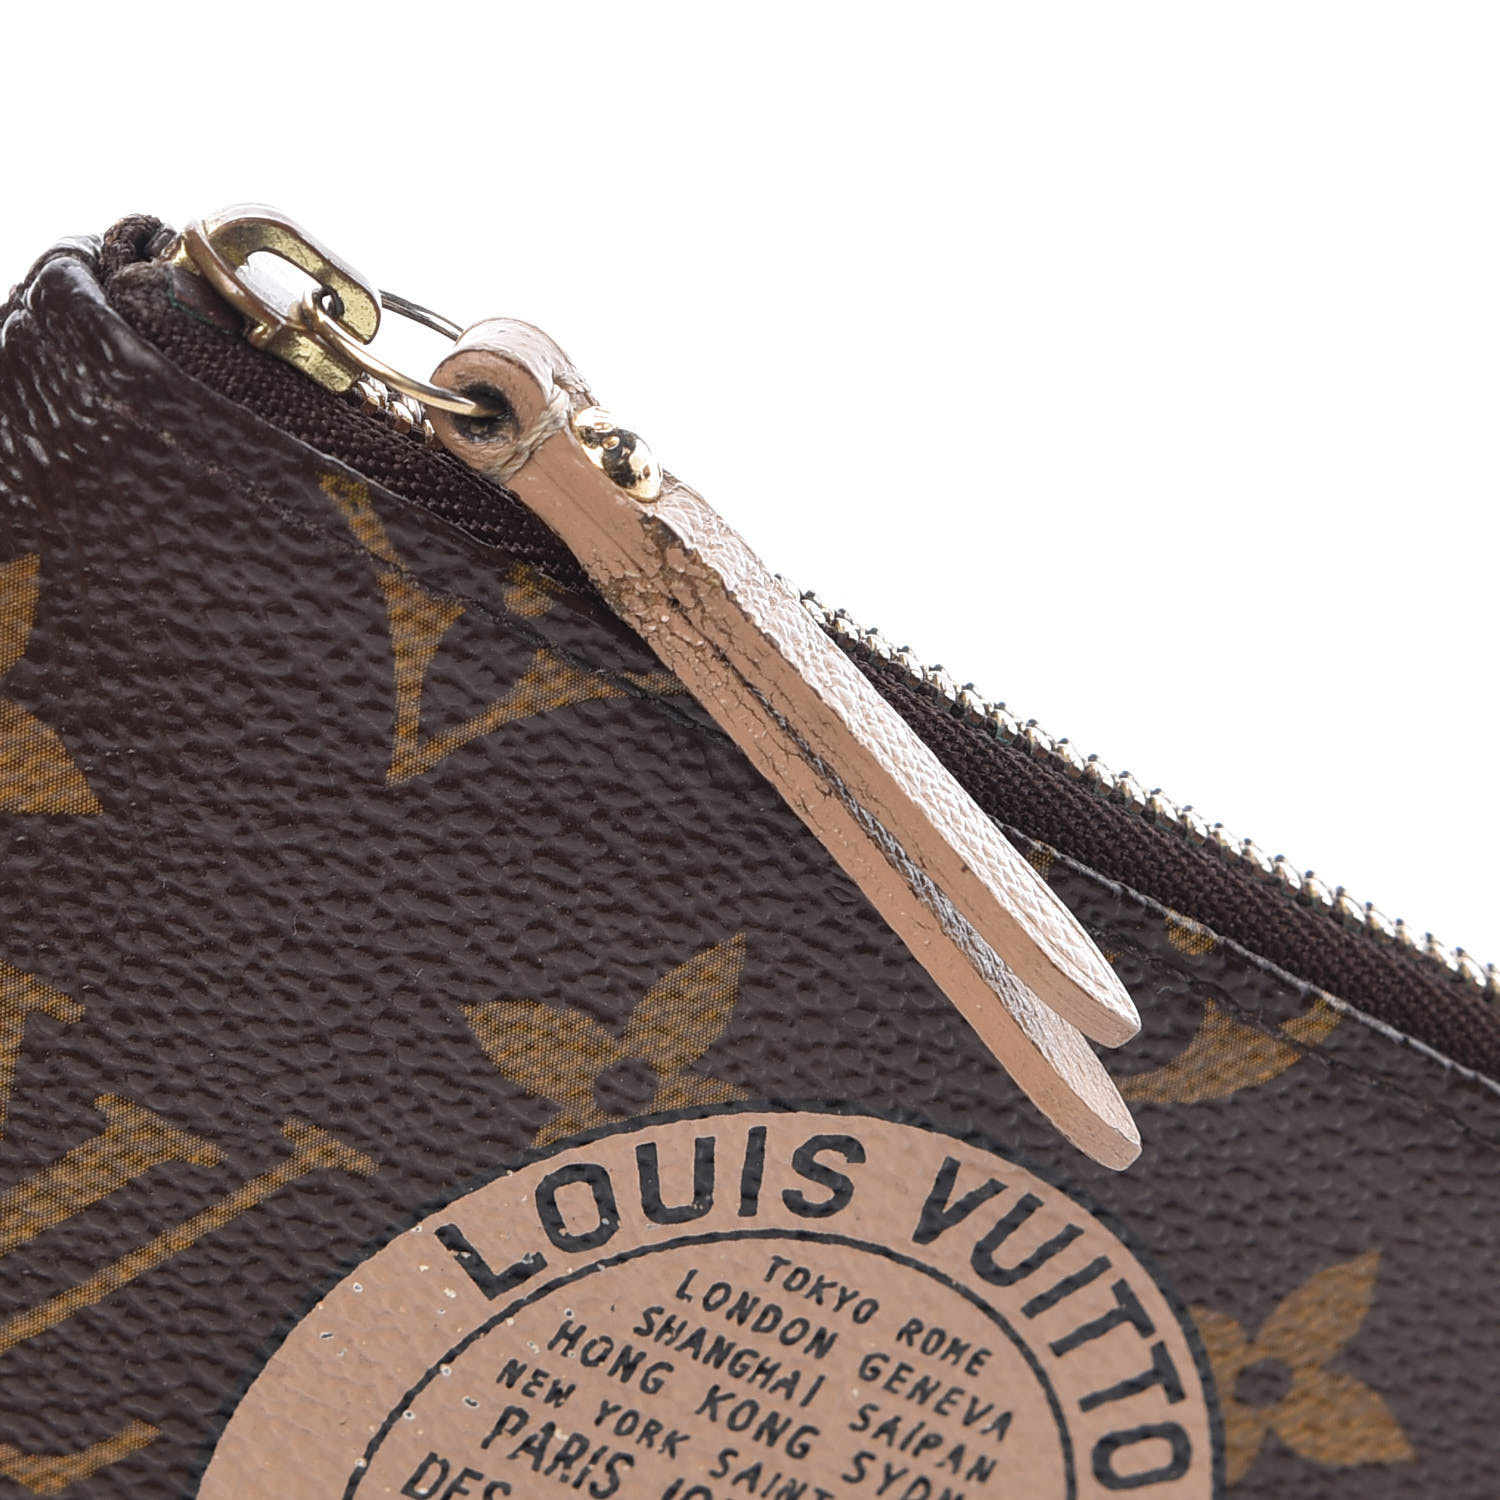 LOUIS VUITTON Monogram Complice Trunks and Bags Key Pouch 363990